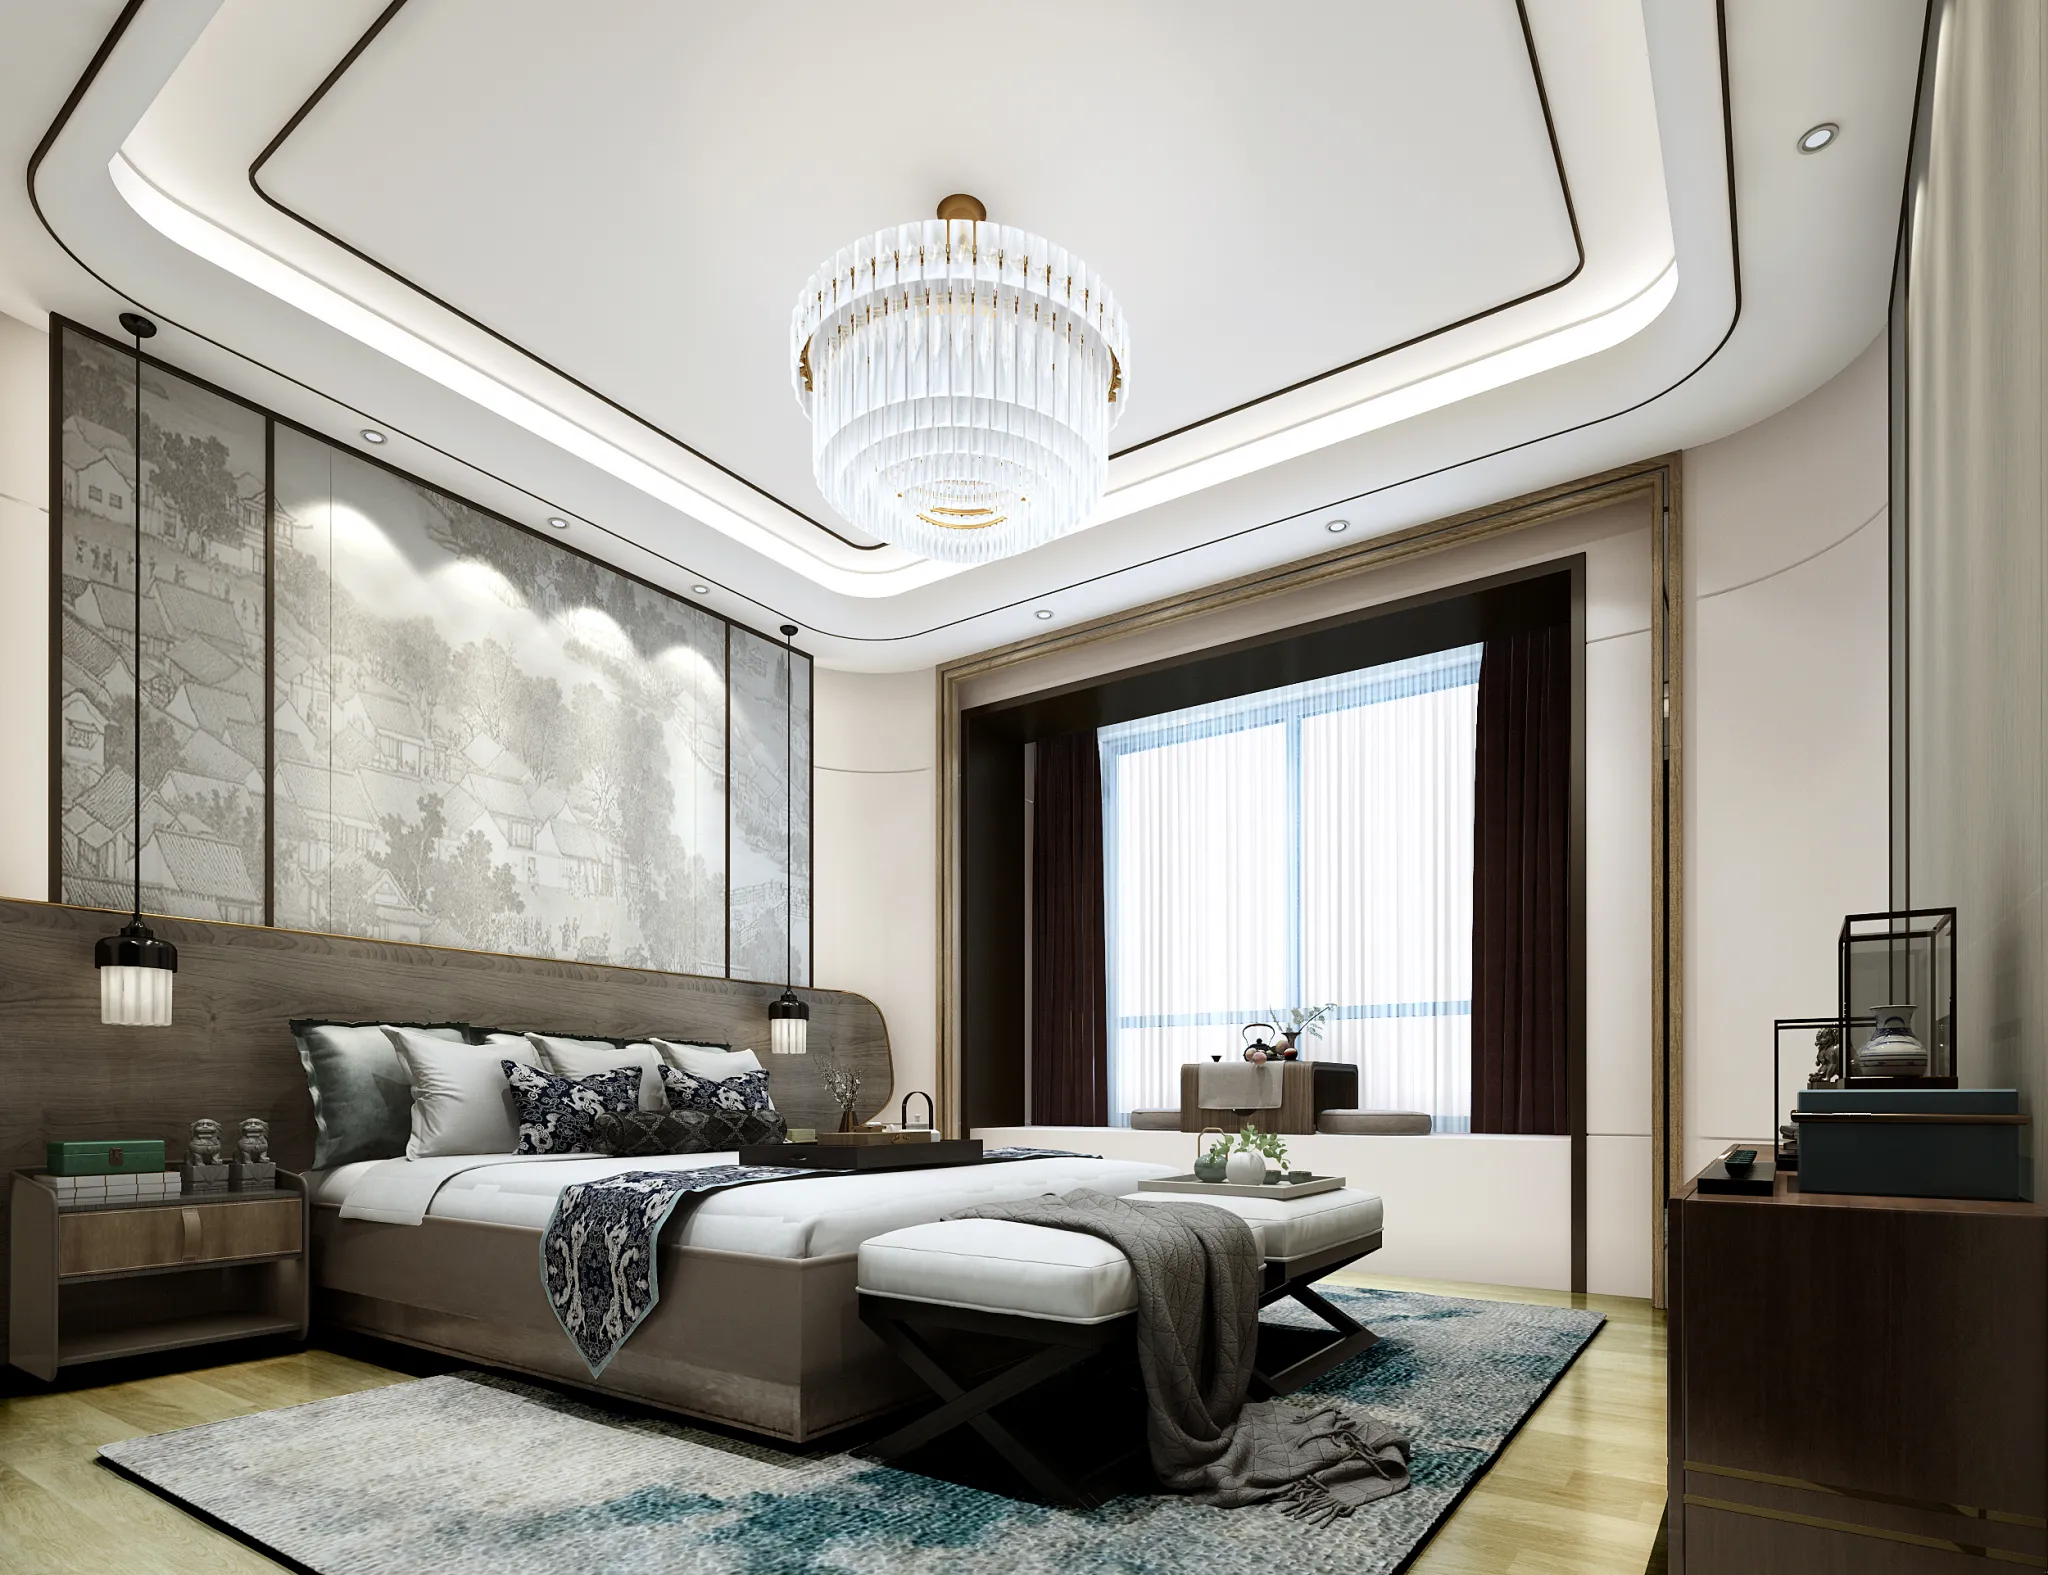 DESMOD INTERIOR 2021 (VRAY)/5. BEDROOM – 2. CHINESE STYLES – 001